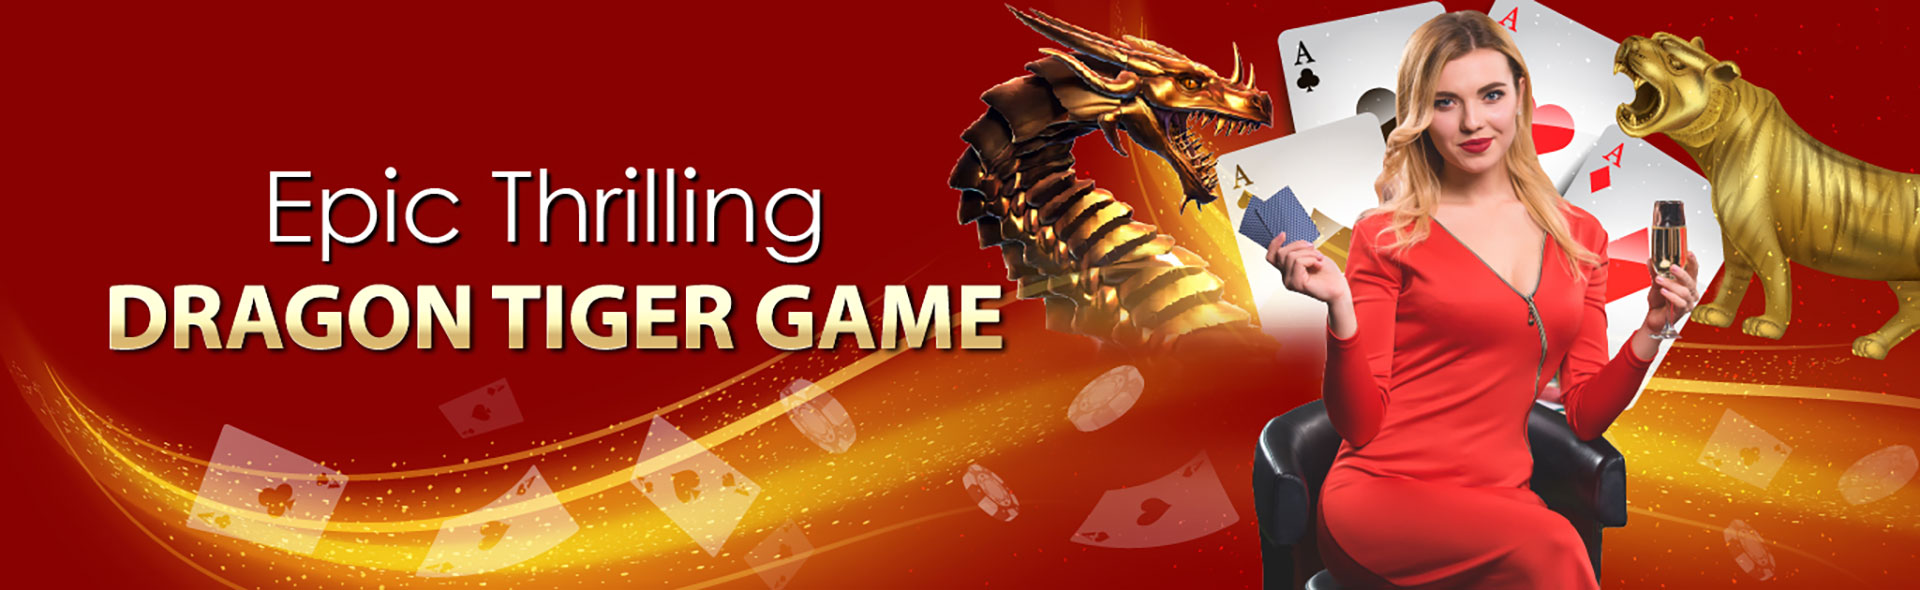 Play Live Draogn Tiger Casino